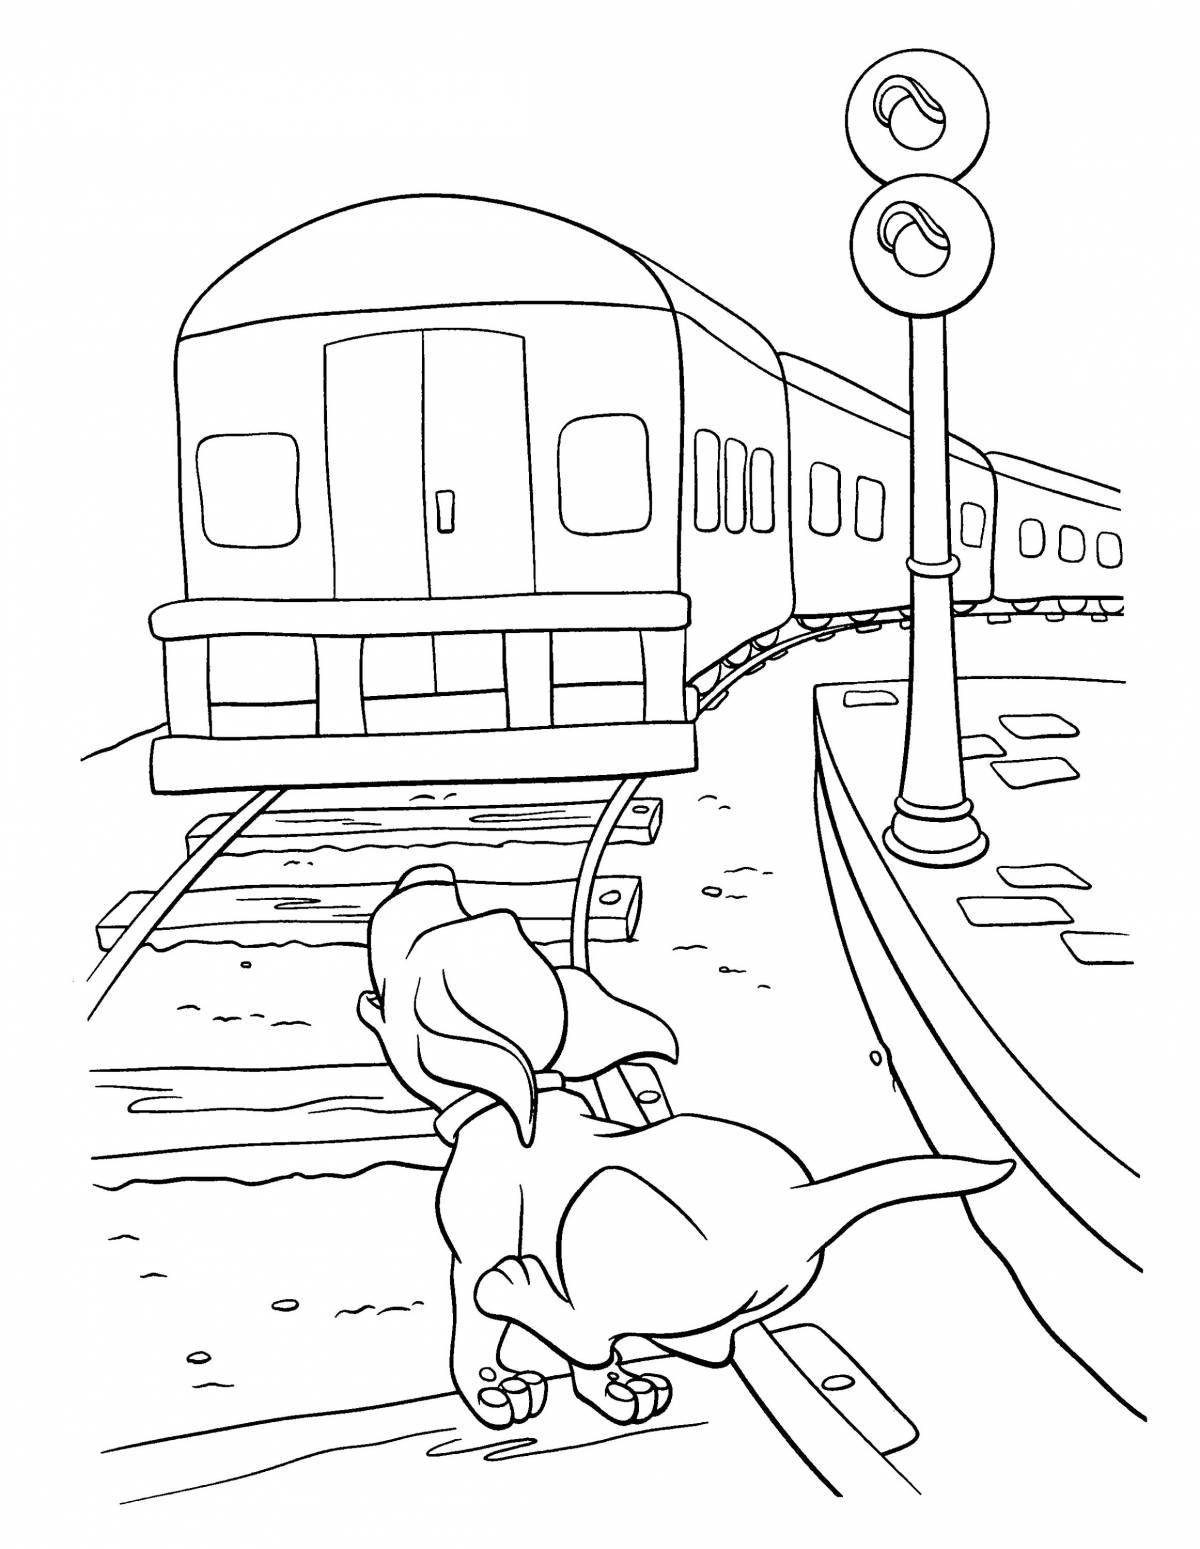 Playful rail safety coloring page